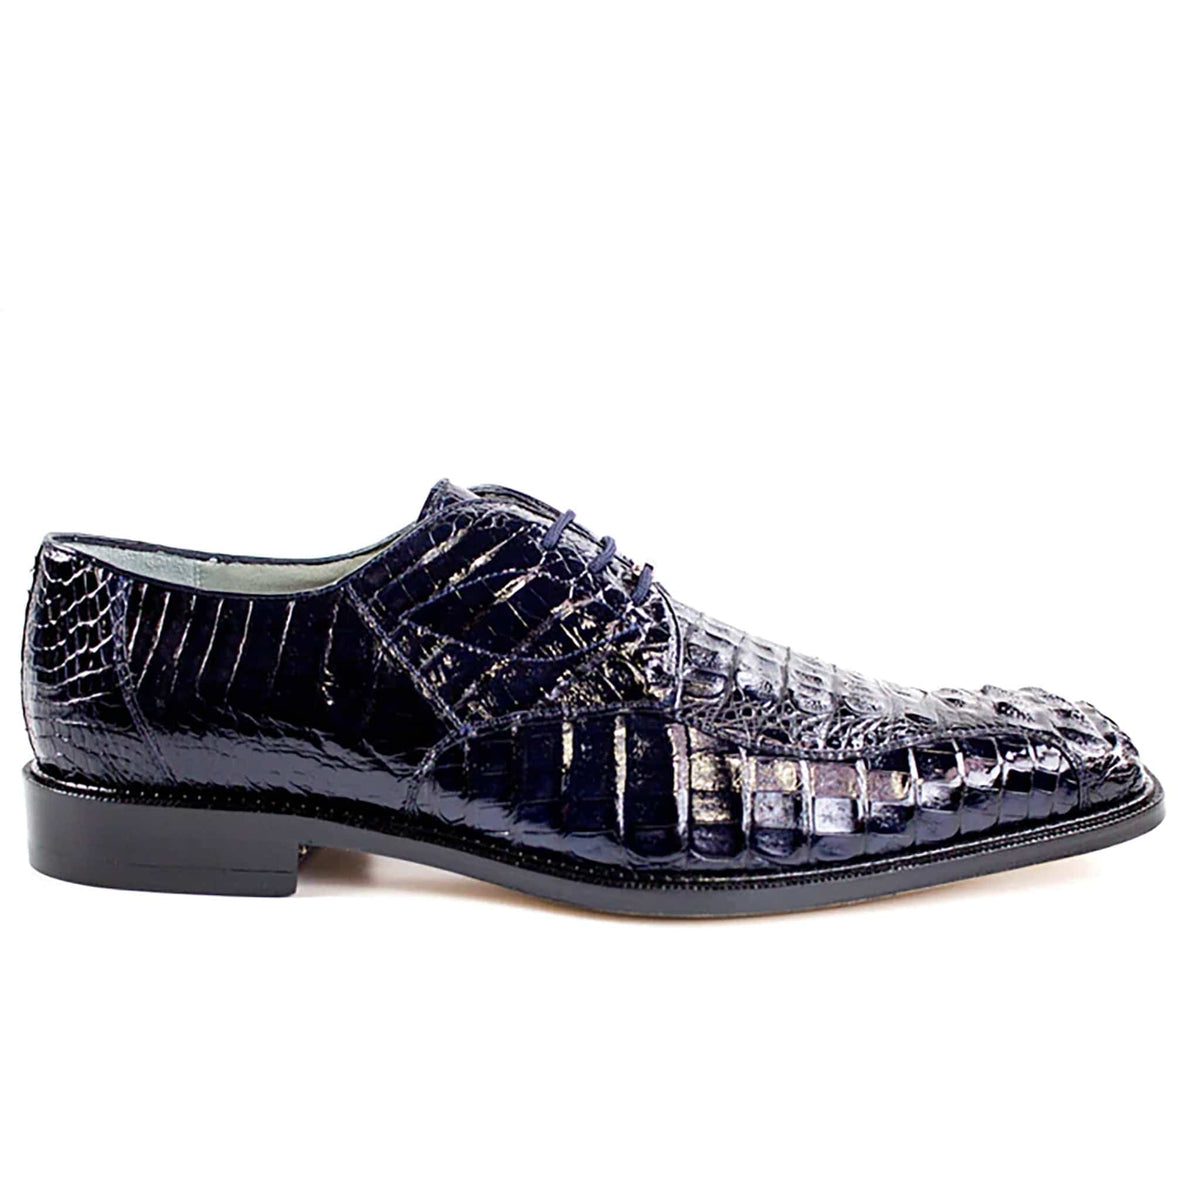 BELVEDERE EXOTIC SHOES NAVY / 9 Belvedere Shose- CHAPO